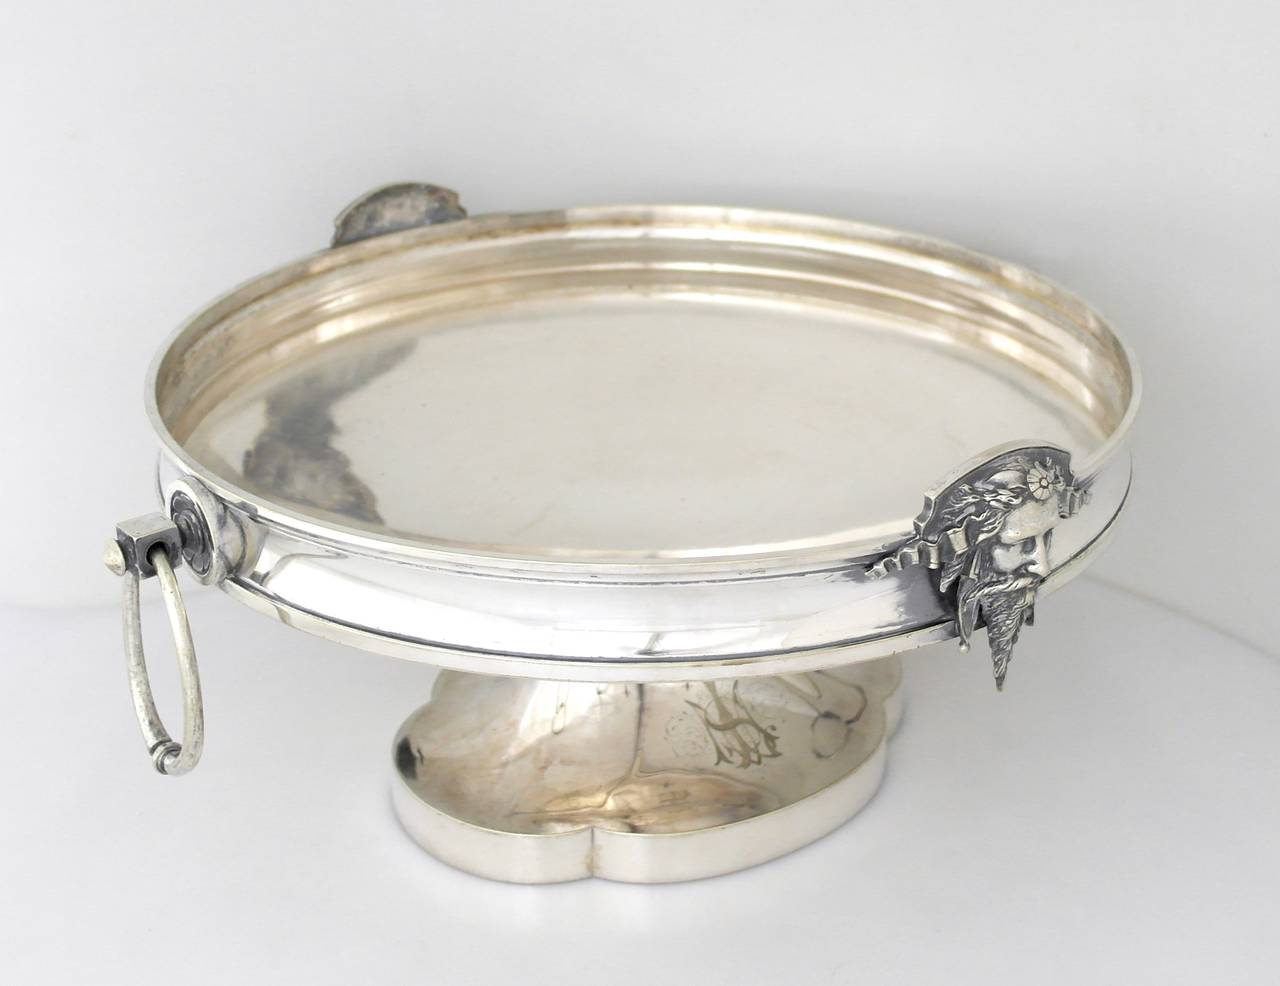 Monumental Gorham Silver Centerpiece with Loop Handles 1871 For Sale 1